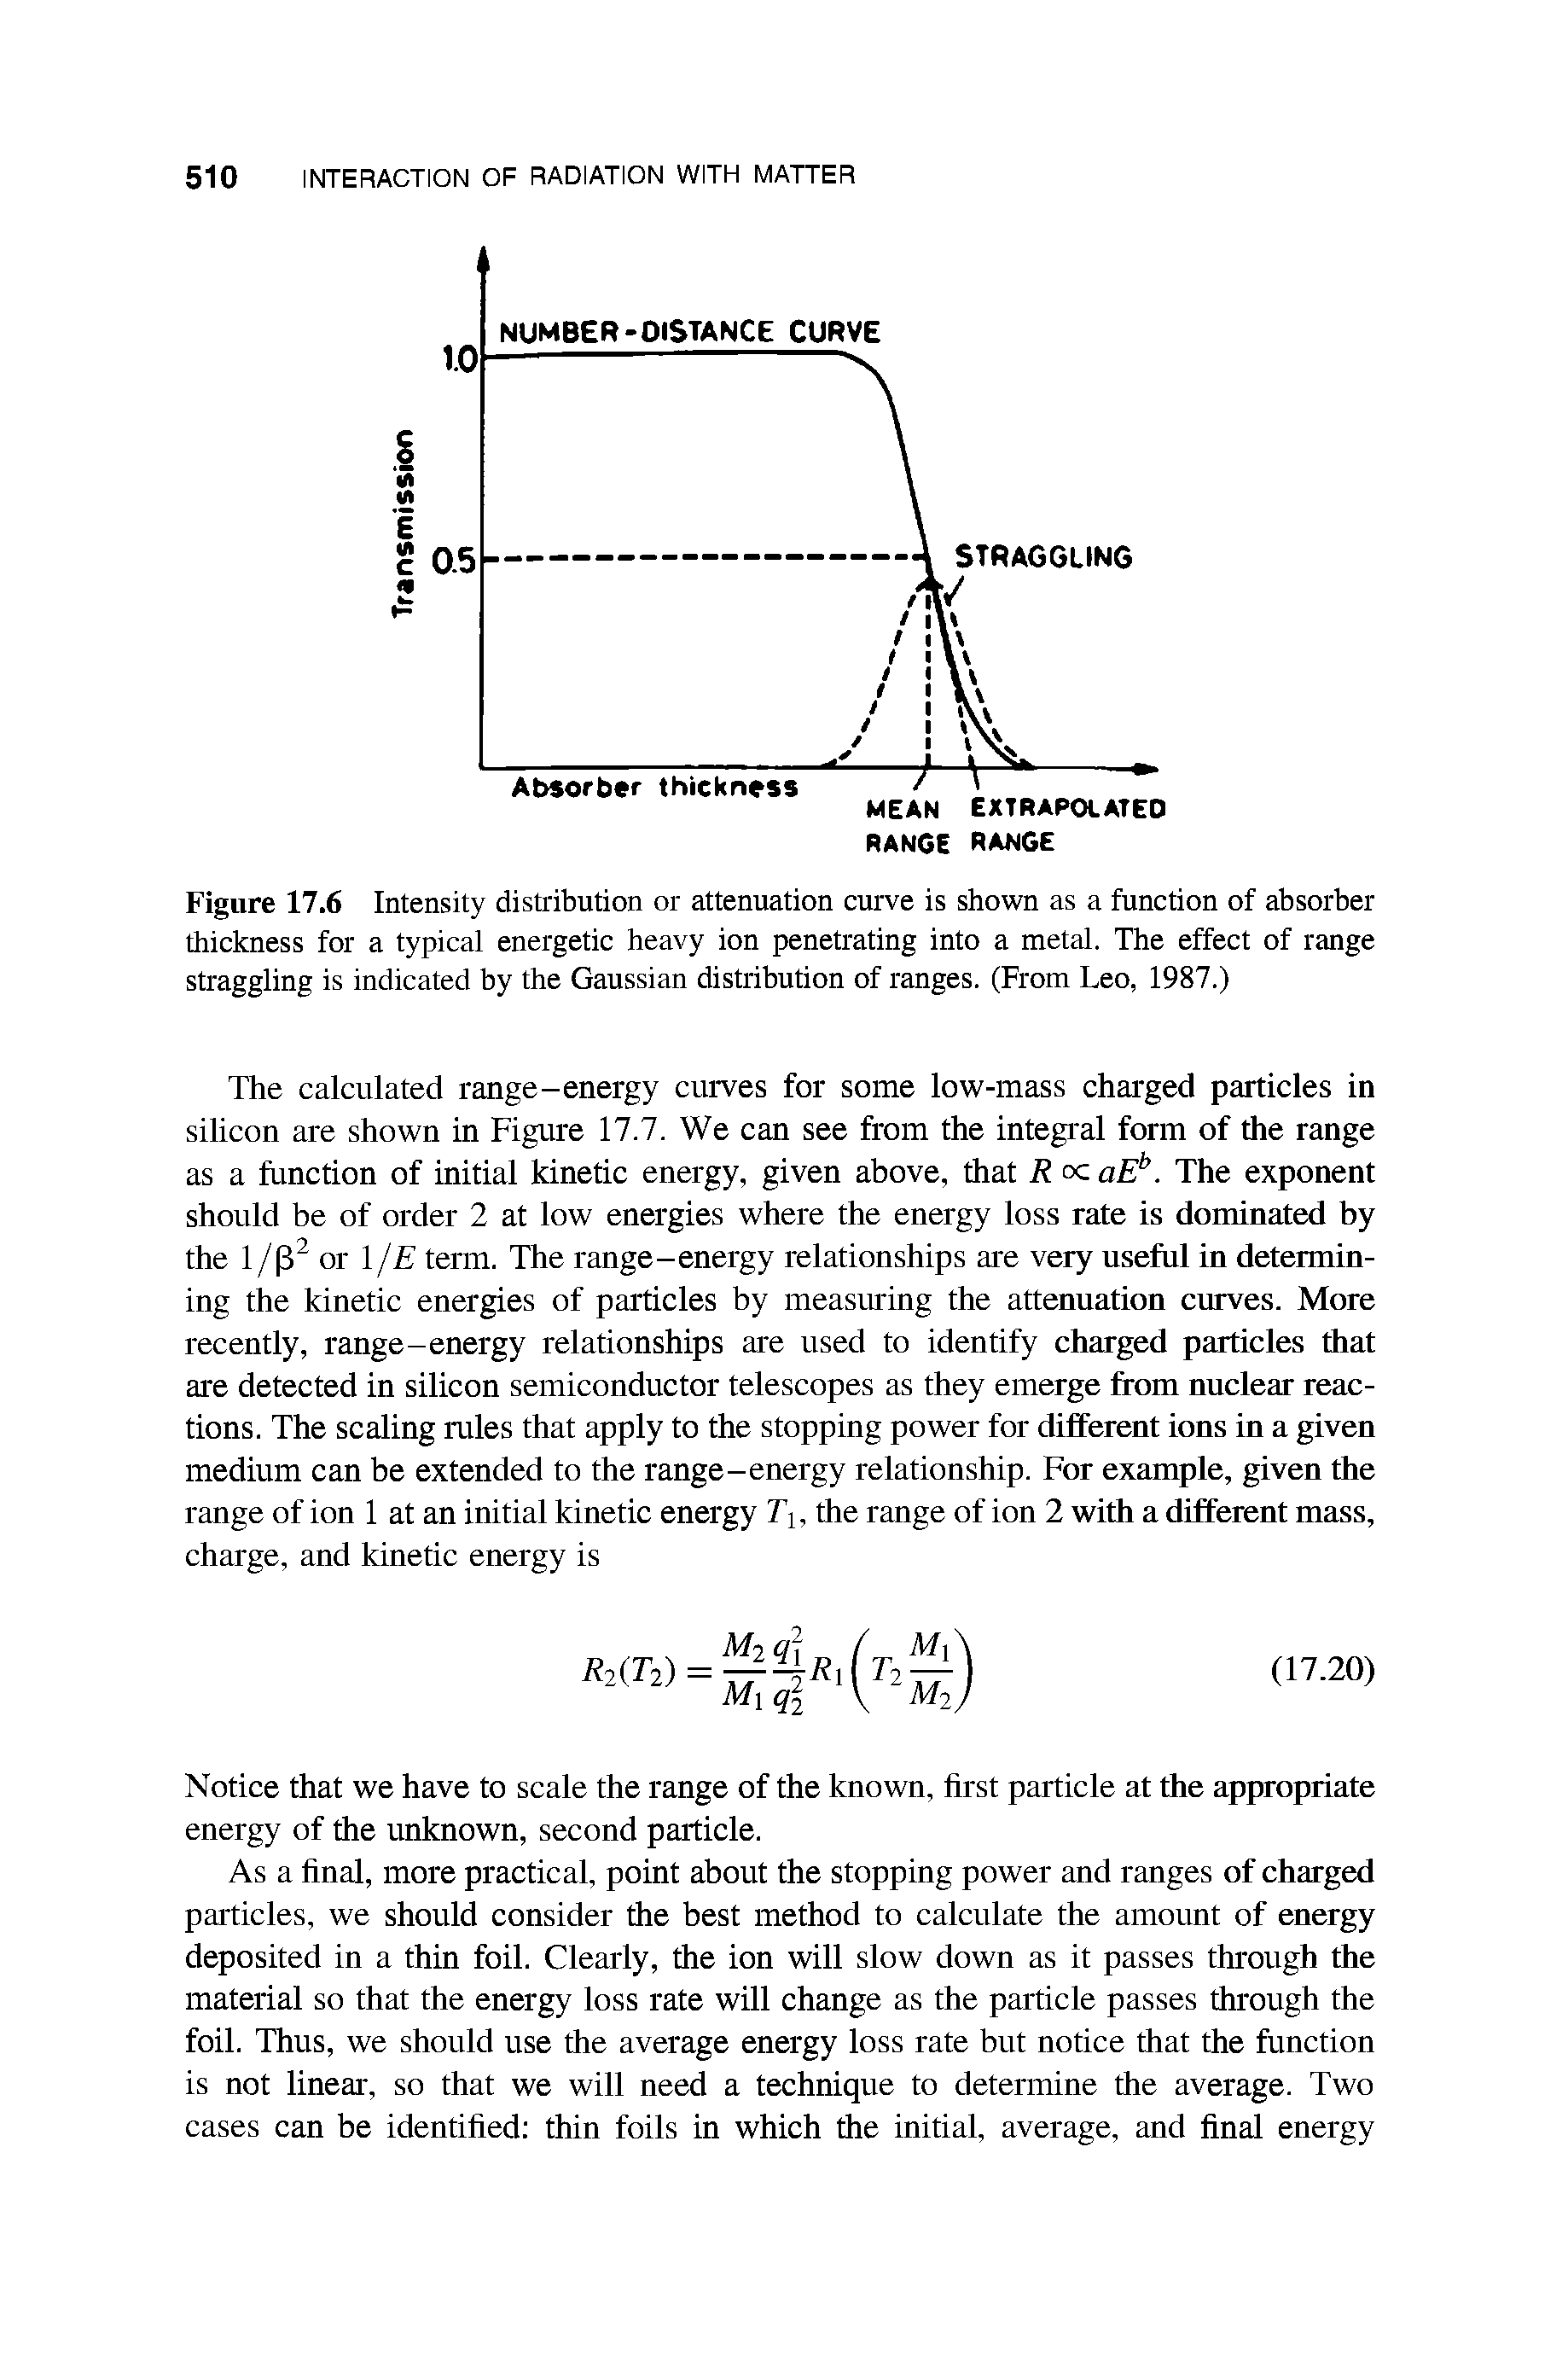 Figure 17.6 Intensity distribution or attenuation curve is shown as a function of absorber thickness for a typical energetic heavy ion penetrating into a metal. The effect of range straggling is indicated by the Gaussian distribution of ranges. (From Leo, 1987.)...